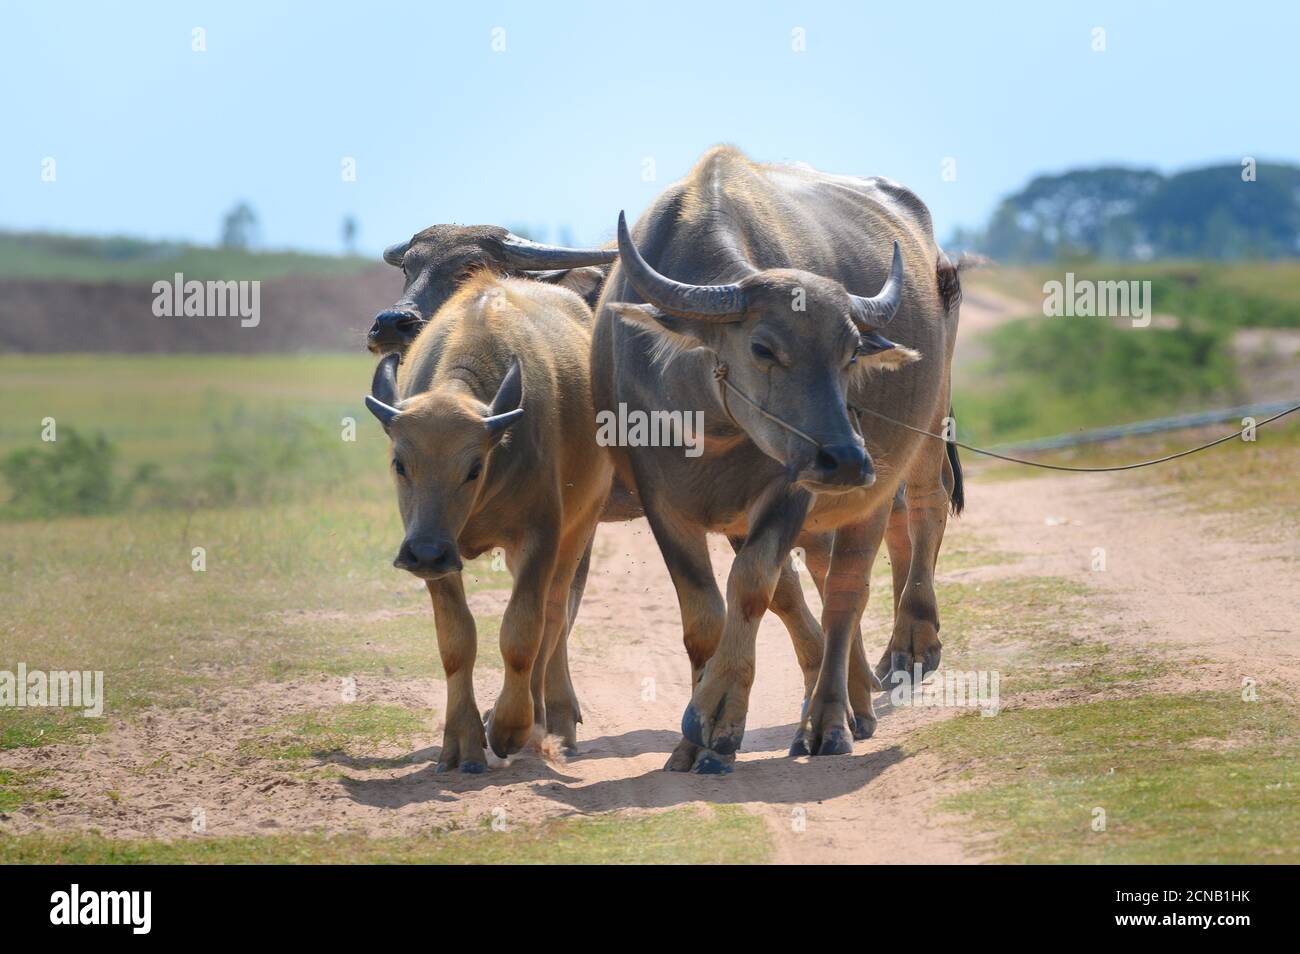 Thai buffalo walk in the road at countryside ,Asian buffalo,Buffalo in the countryside thailand. Stock Photo